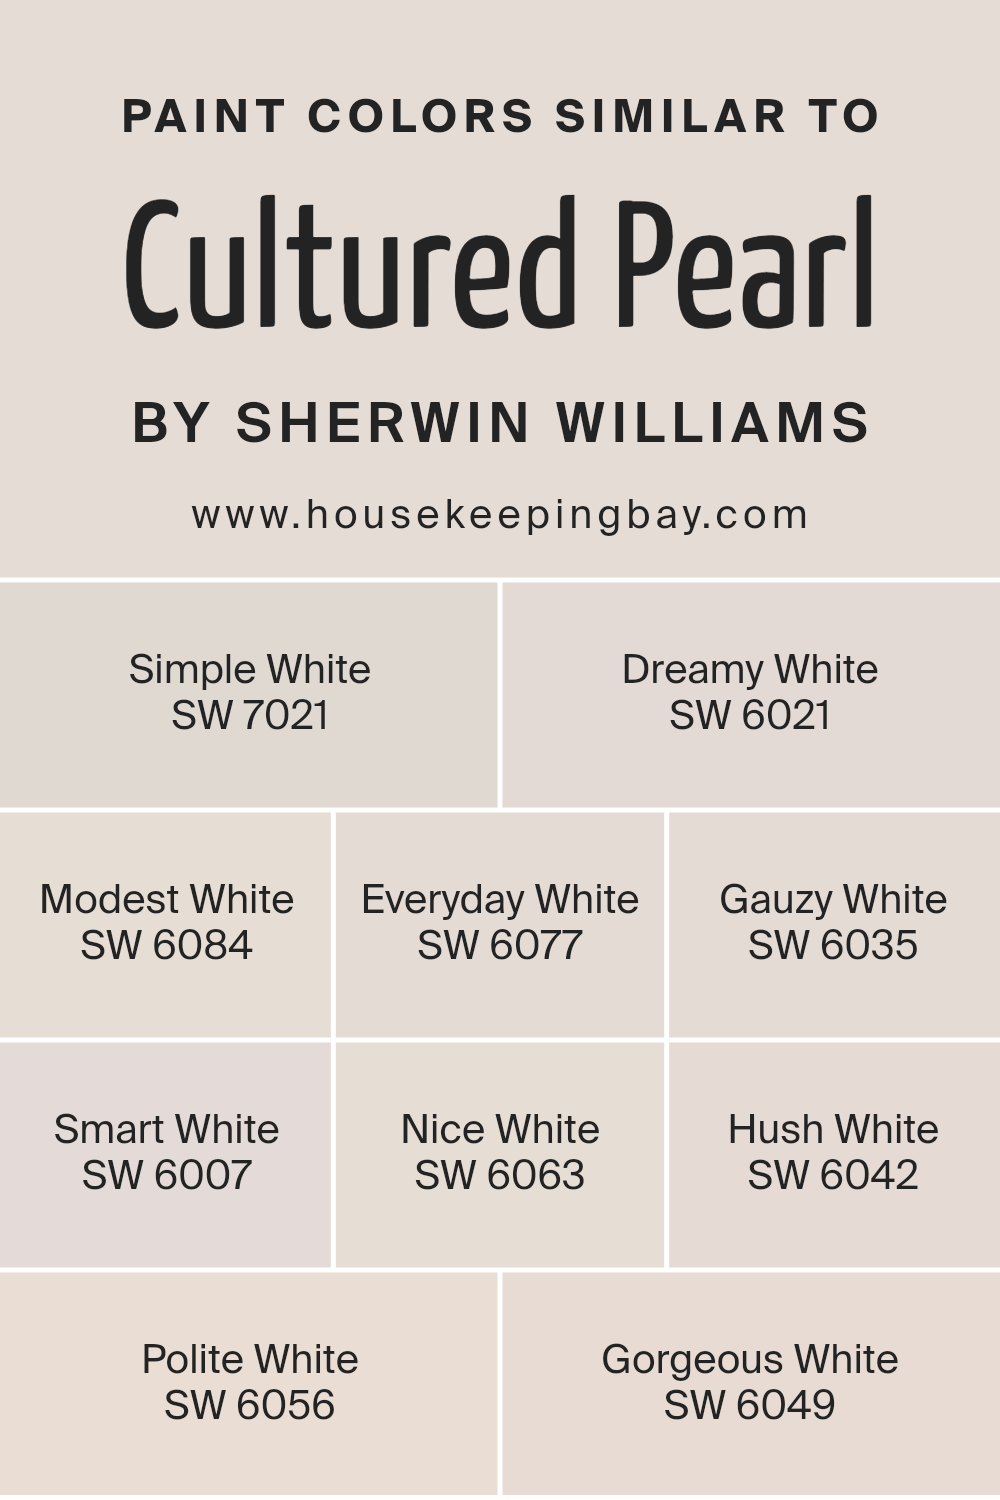 colors_similar_to_cultured_pearl_sw_6028